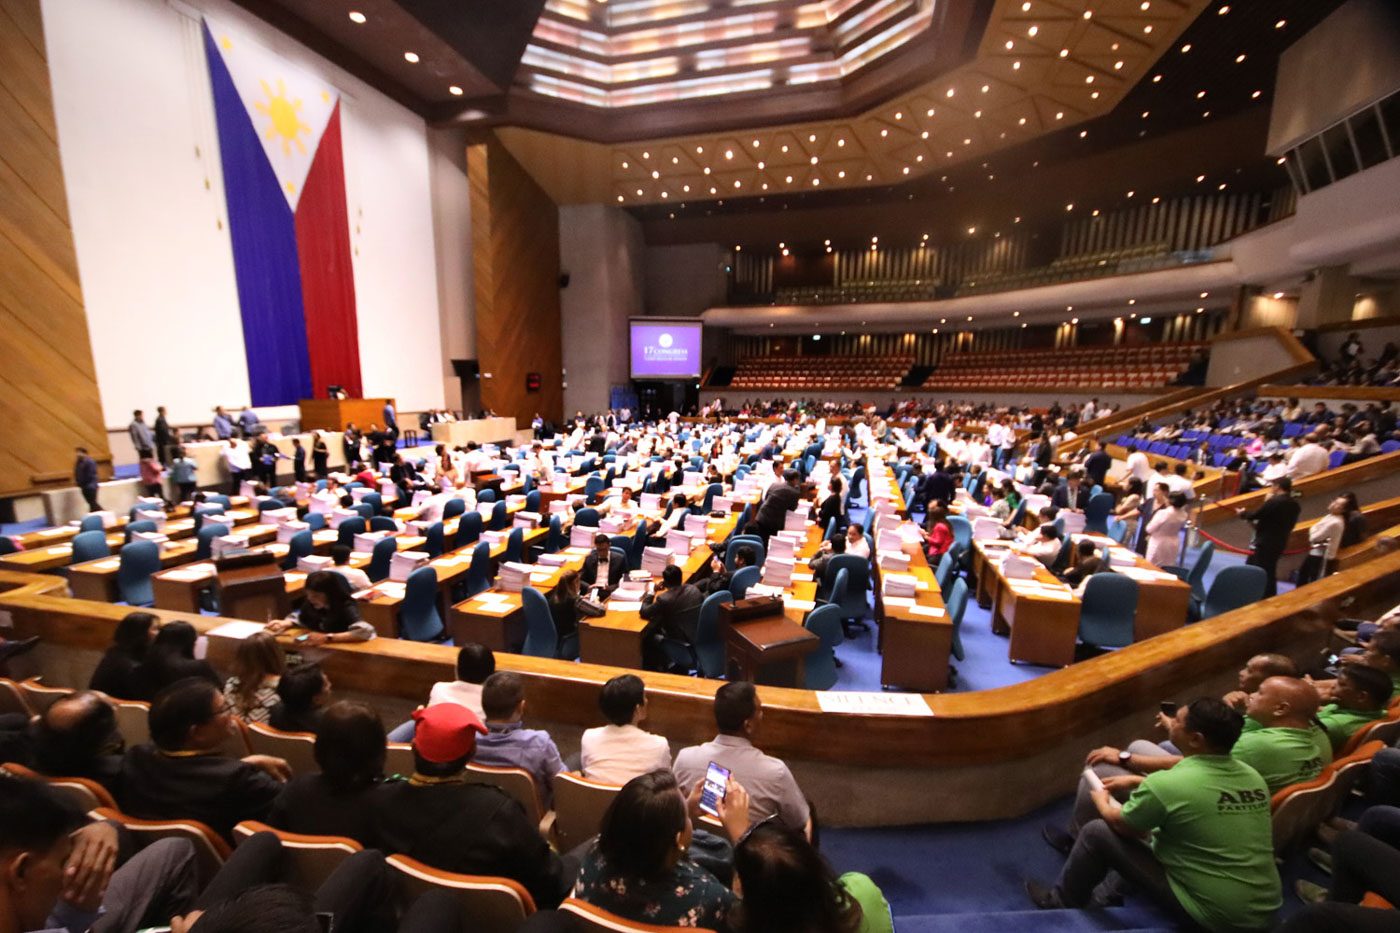 House panel ‘enjoins’ NTC to grant ABS-CBN provisional authority to operate